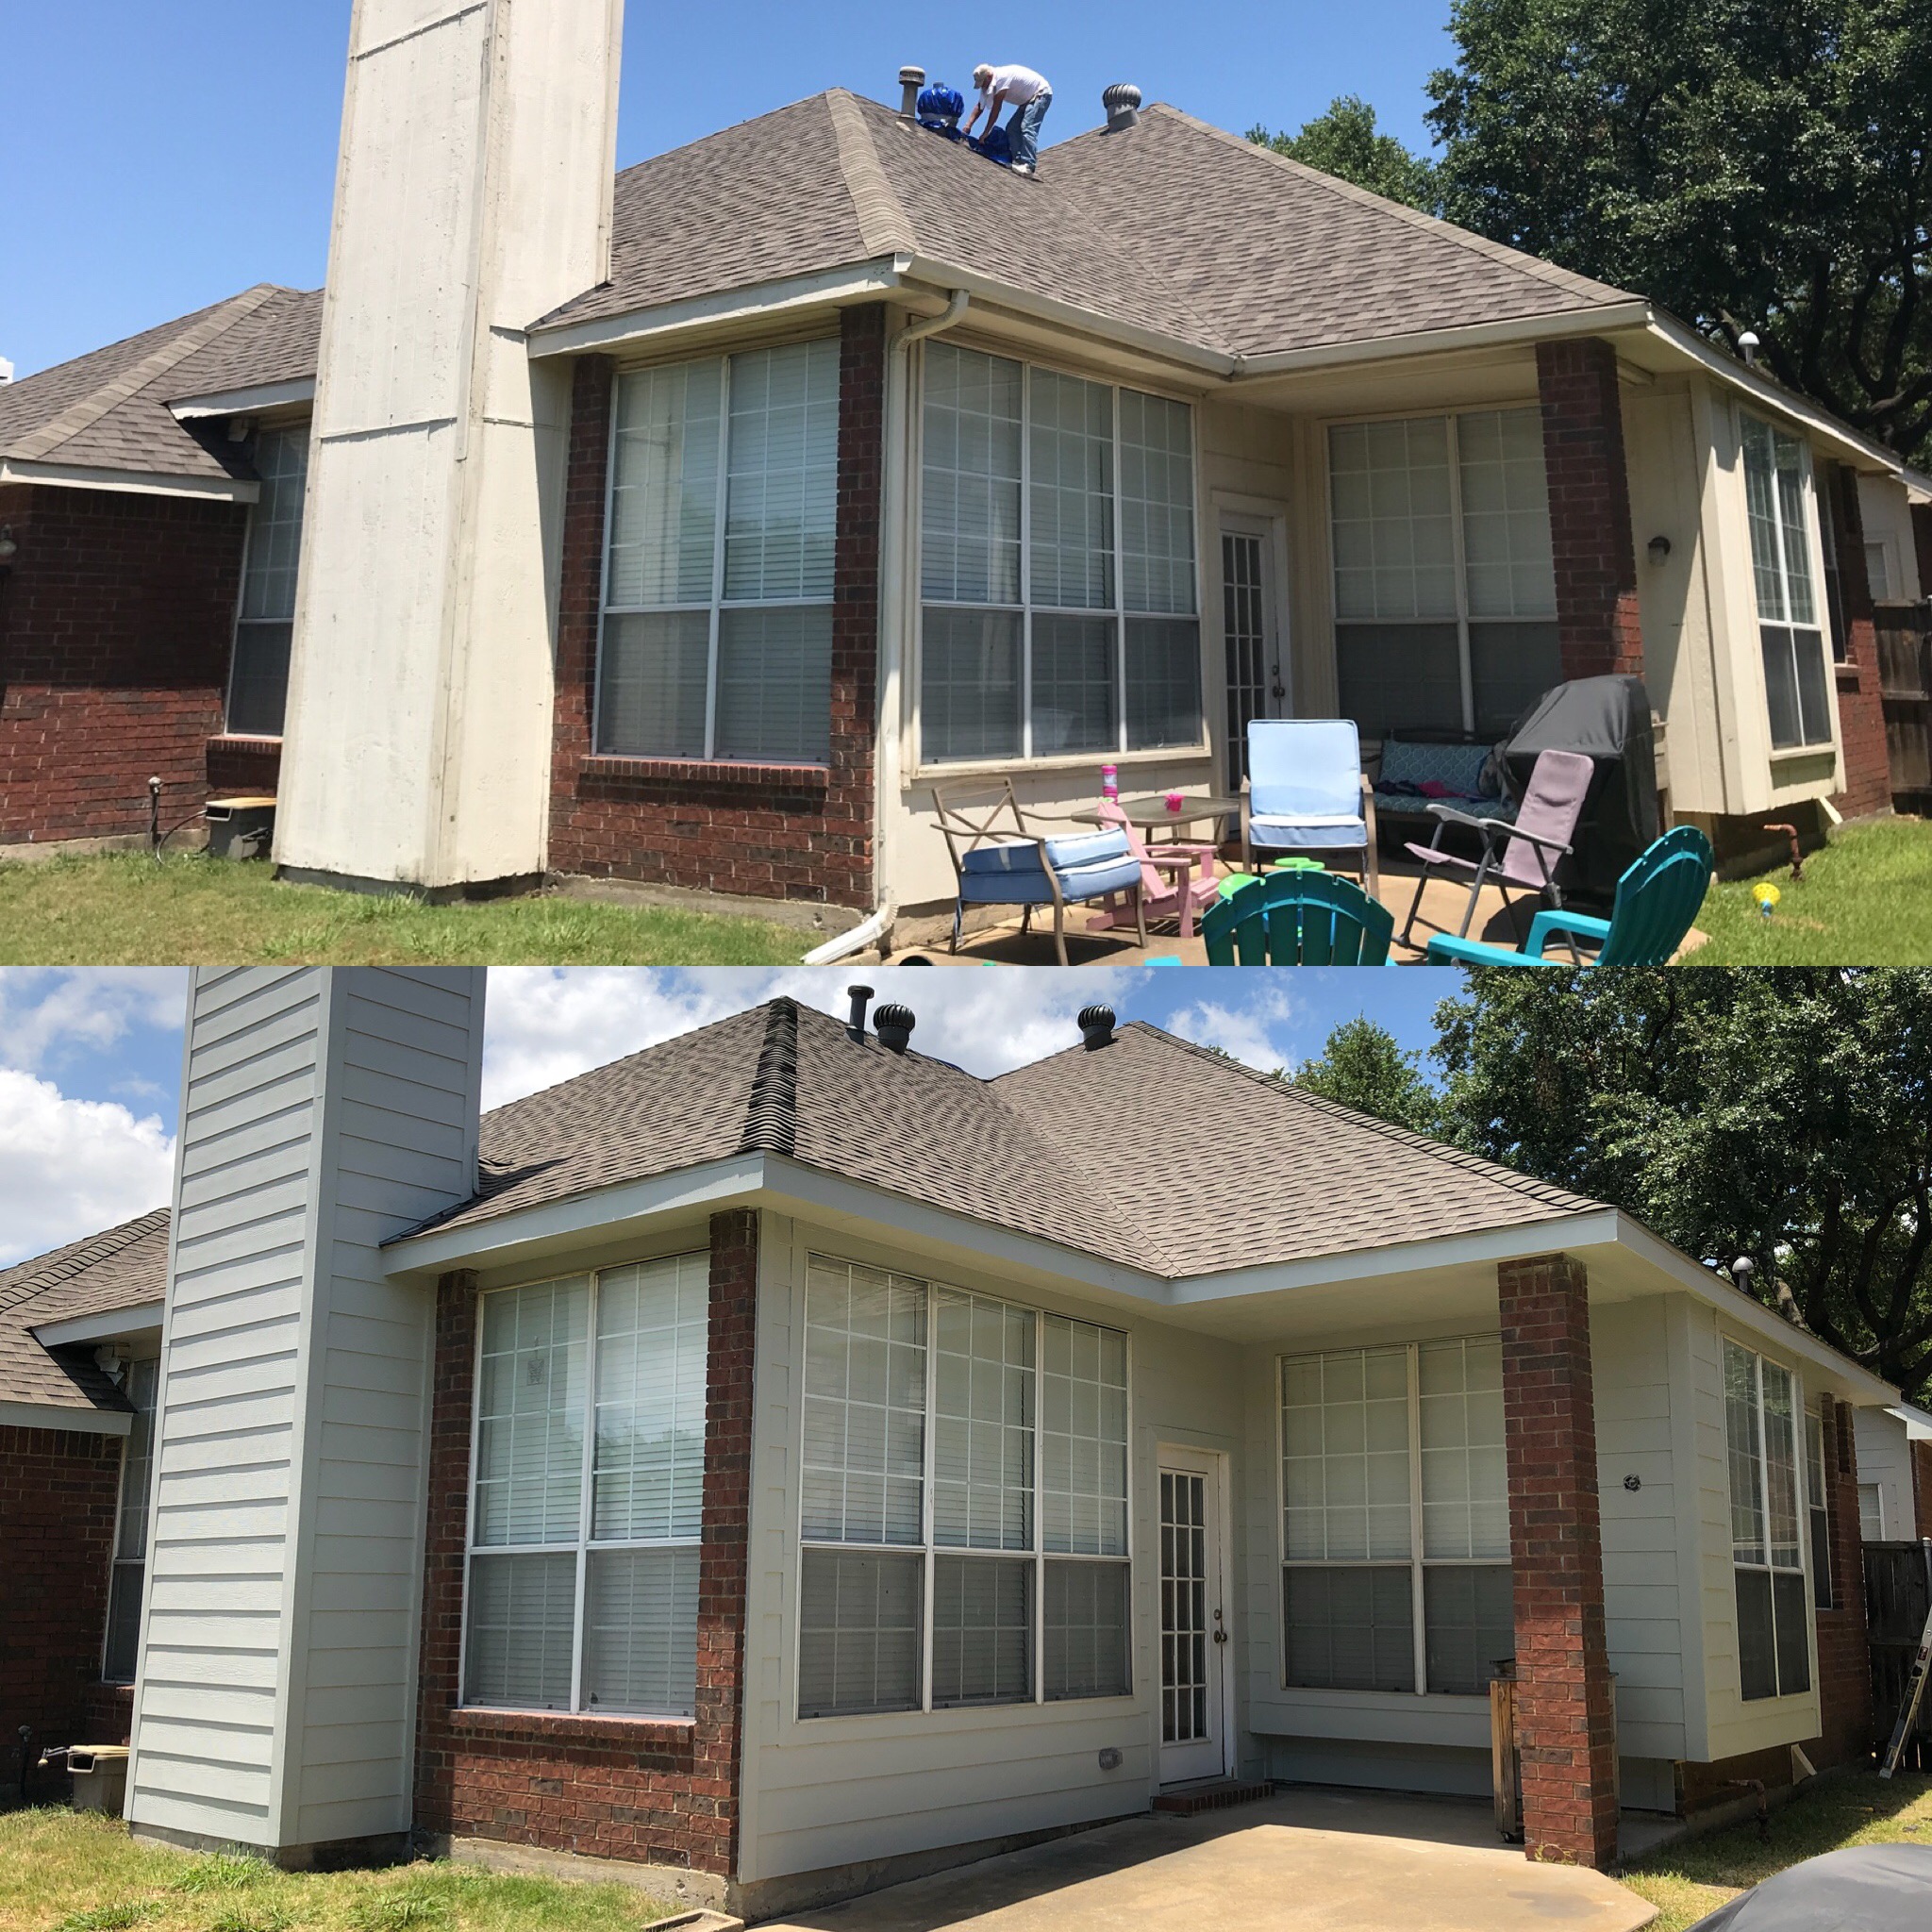 Before and after photos showing chimney siding replacement and chimney cap replacement on roof of a home in North Texas